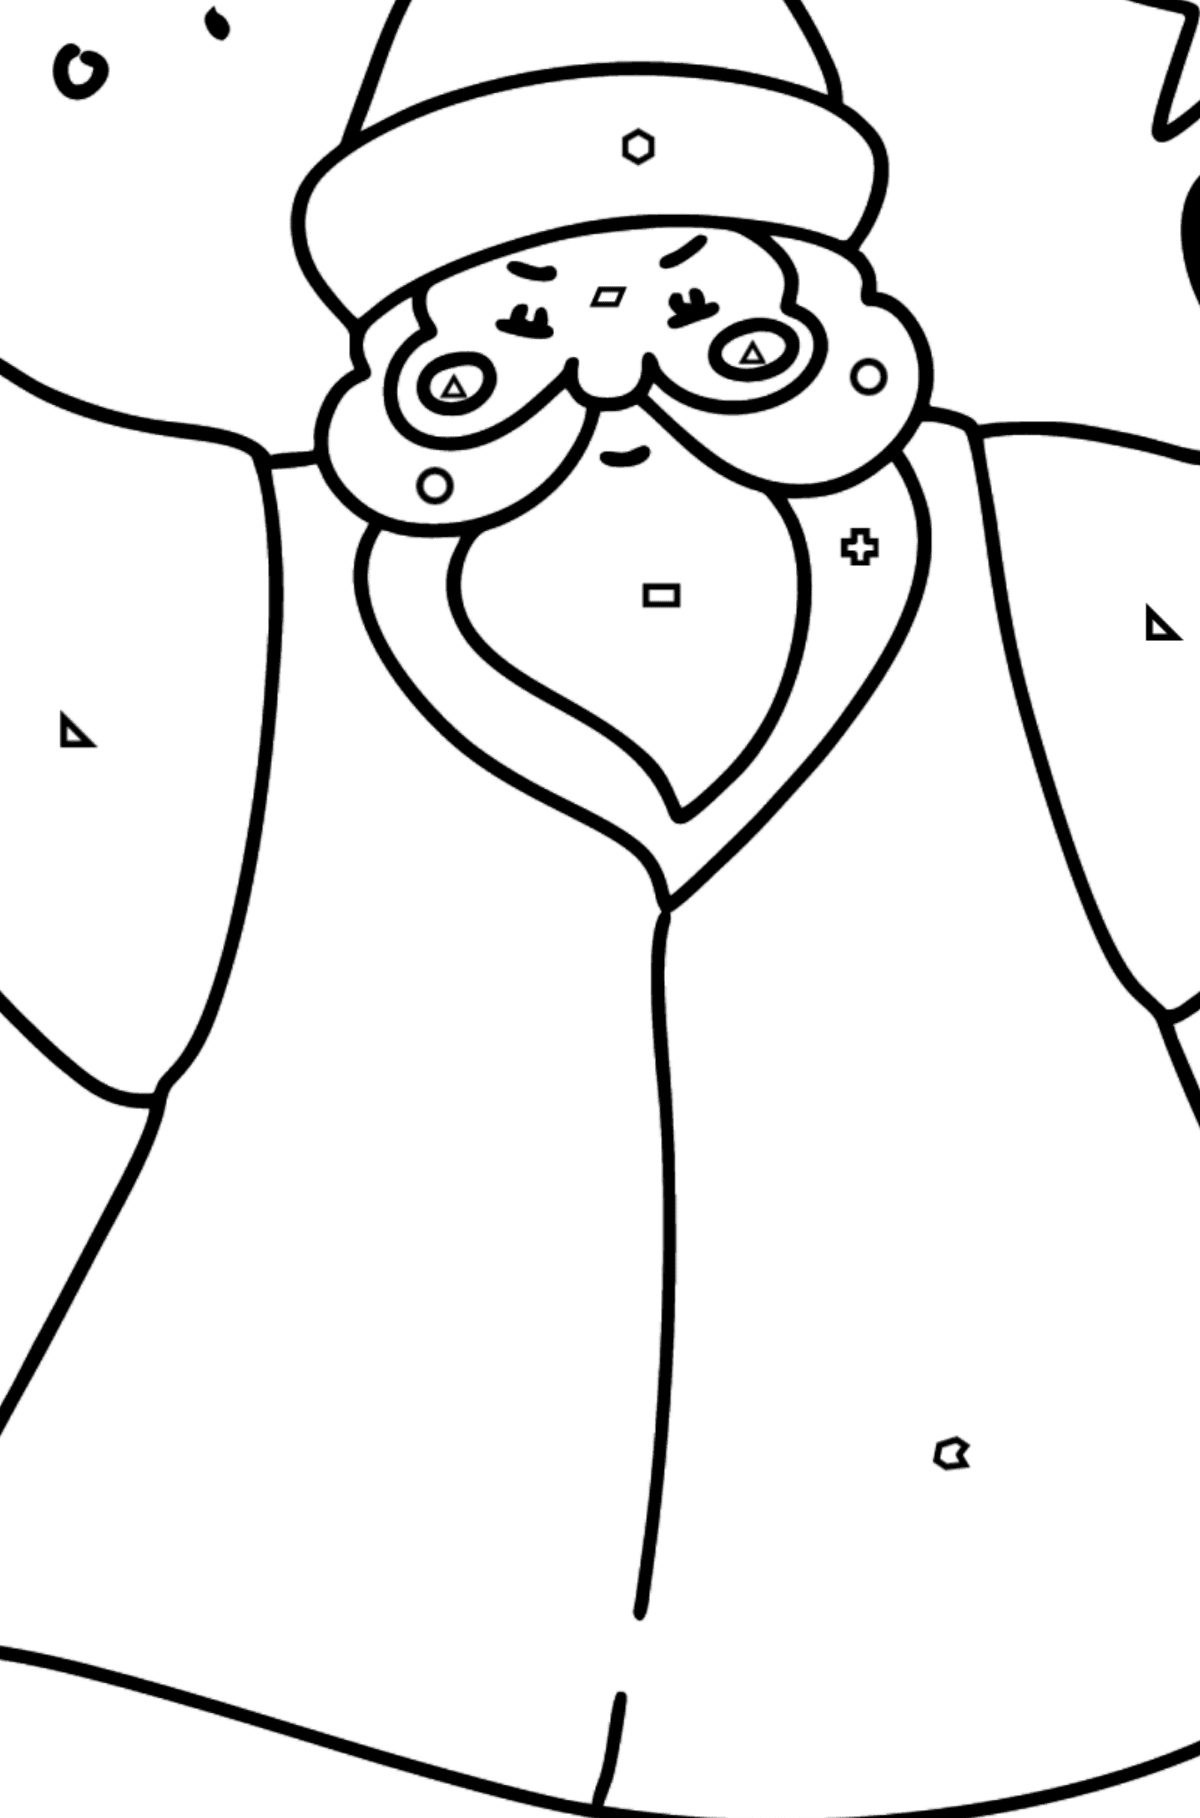 Father Frost coloring page - Coloring by Geometric Shapes for Kids